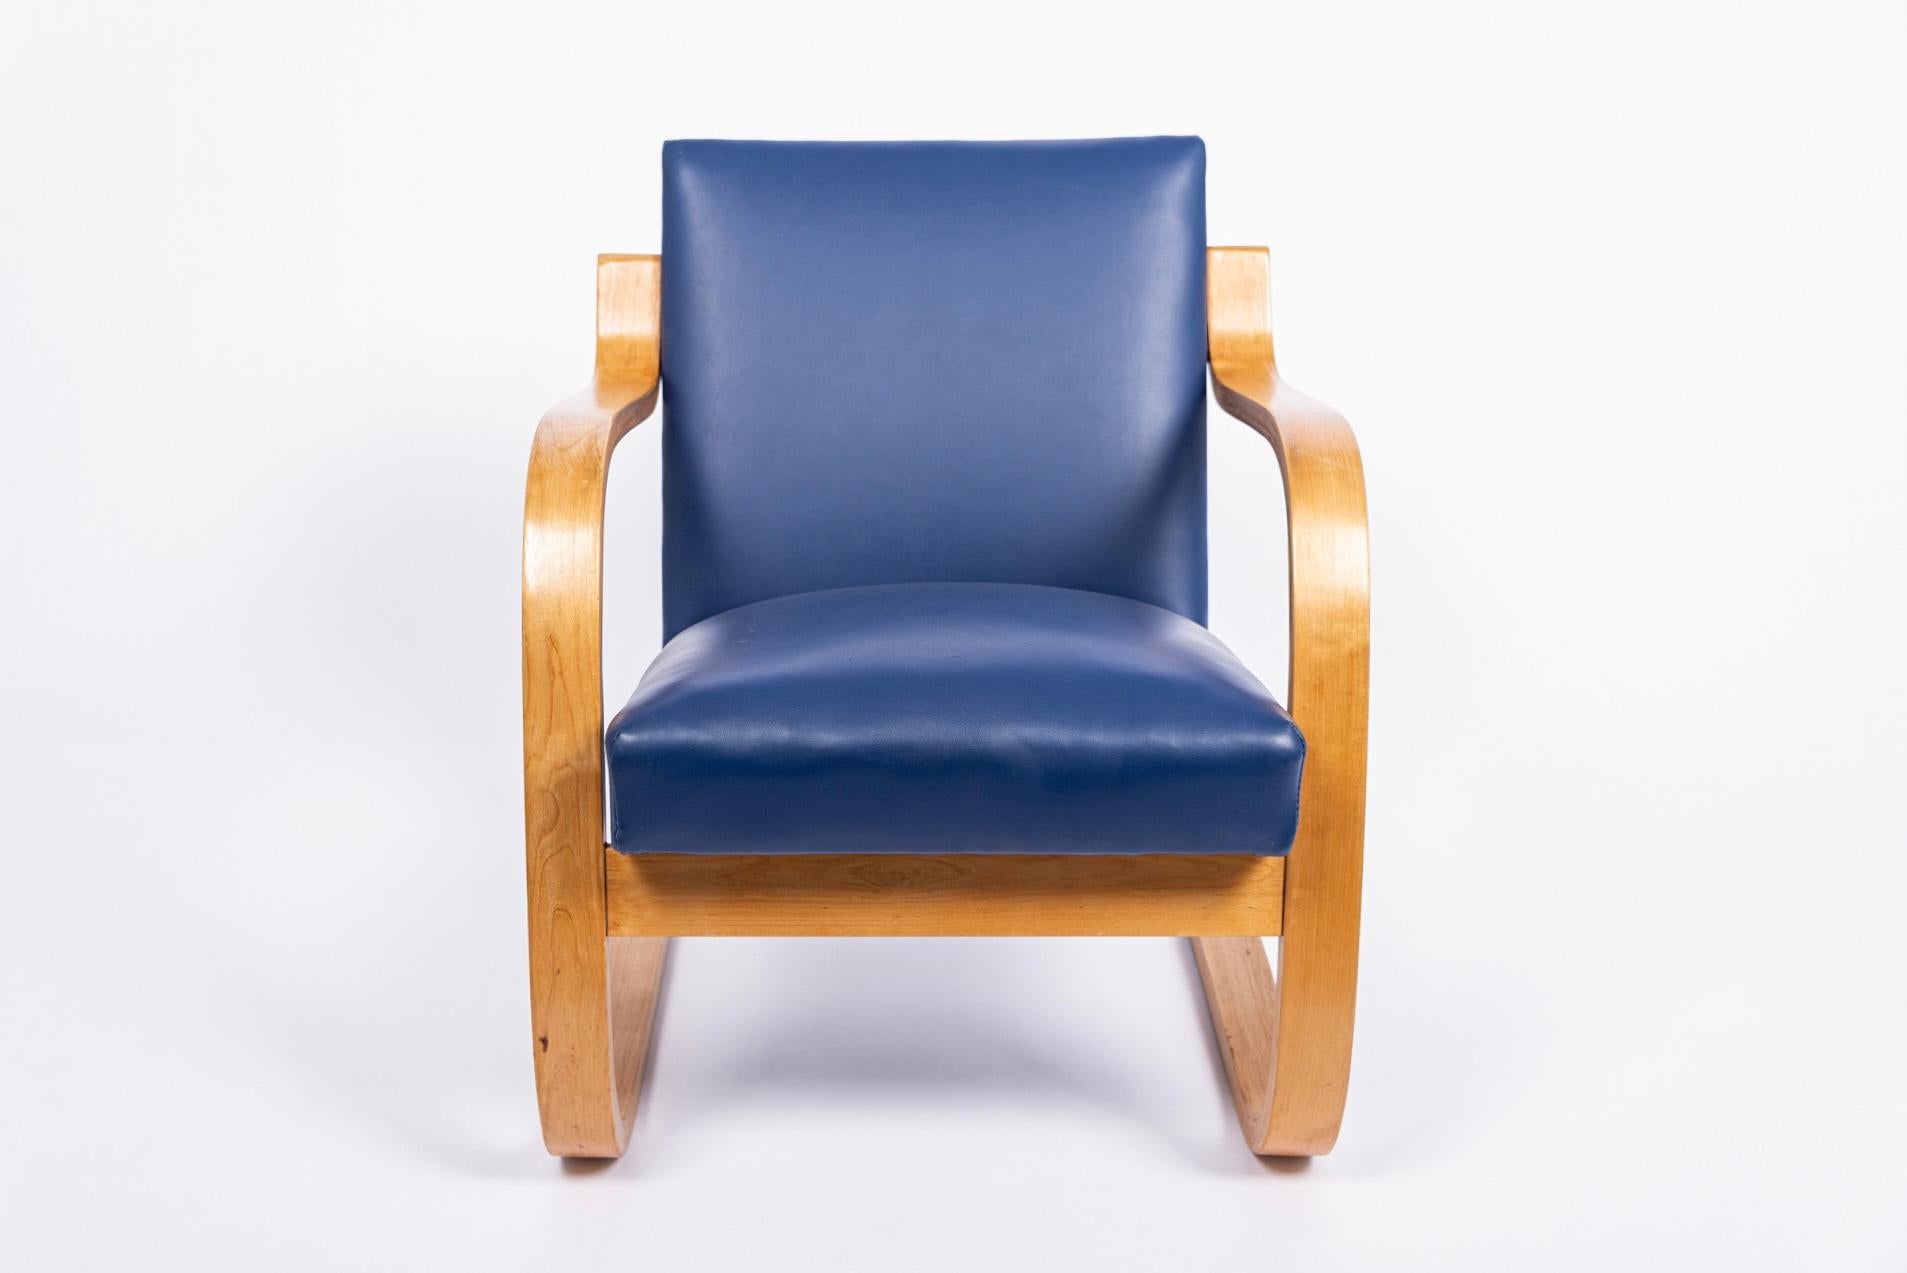 Finnish Early Model 402 Armchair by Alvar Aalto for Artek, Made in Finland, 1930s For Sale